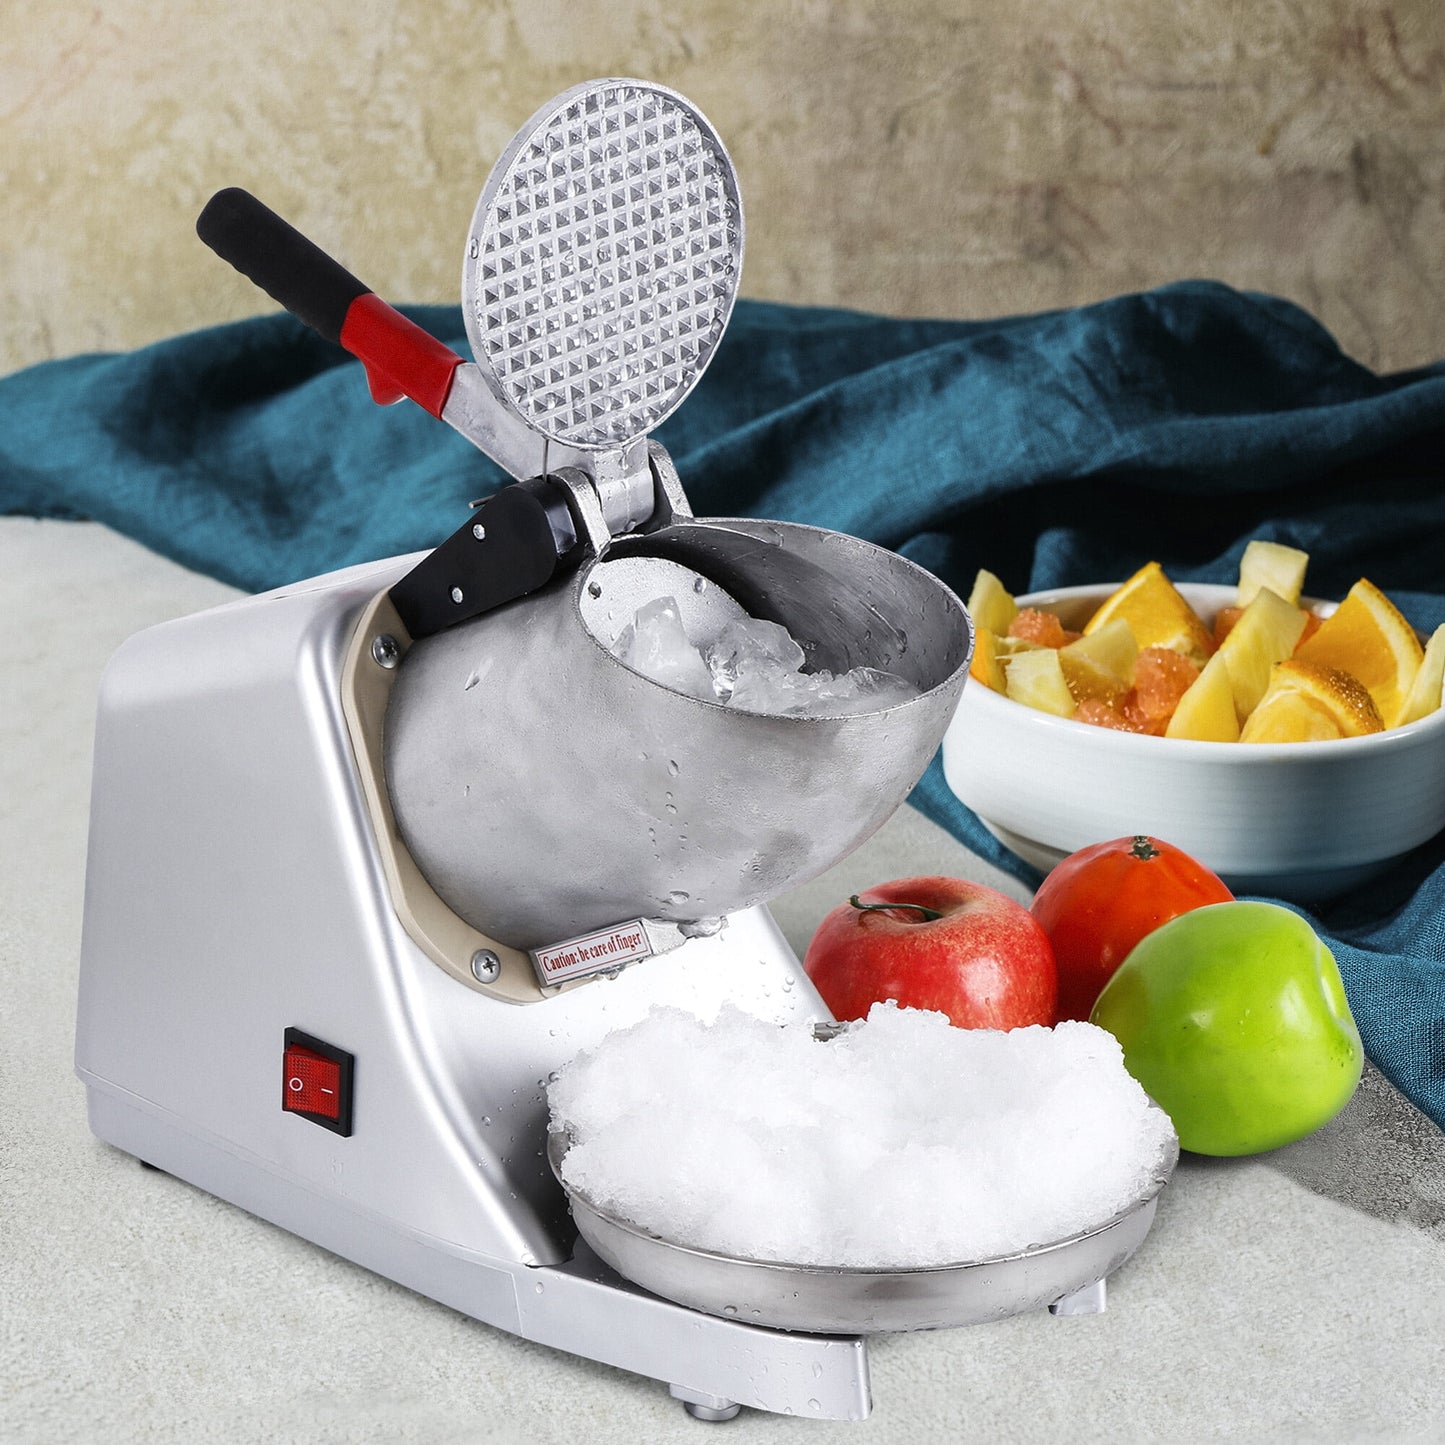 SuperDeal Ice Shaver Machine 300W Electric Ice Crusher Cold Drink Smoothie Making w/Bowl, Orange